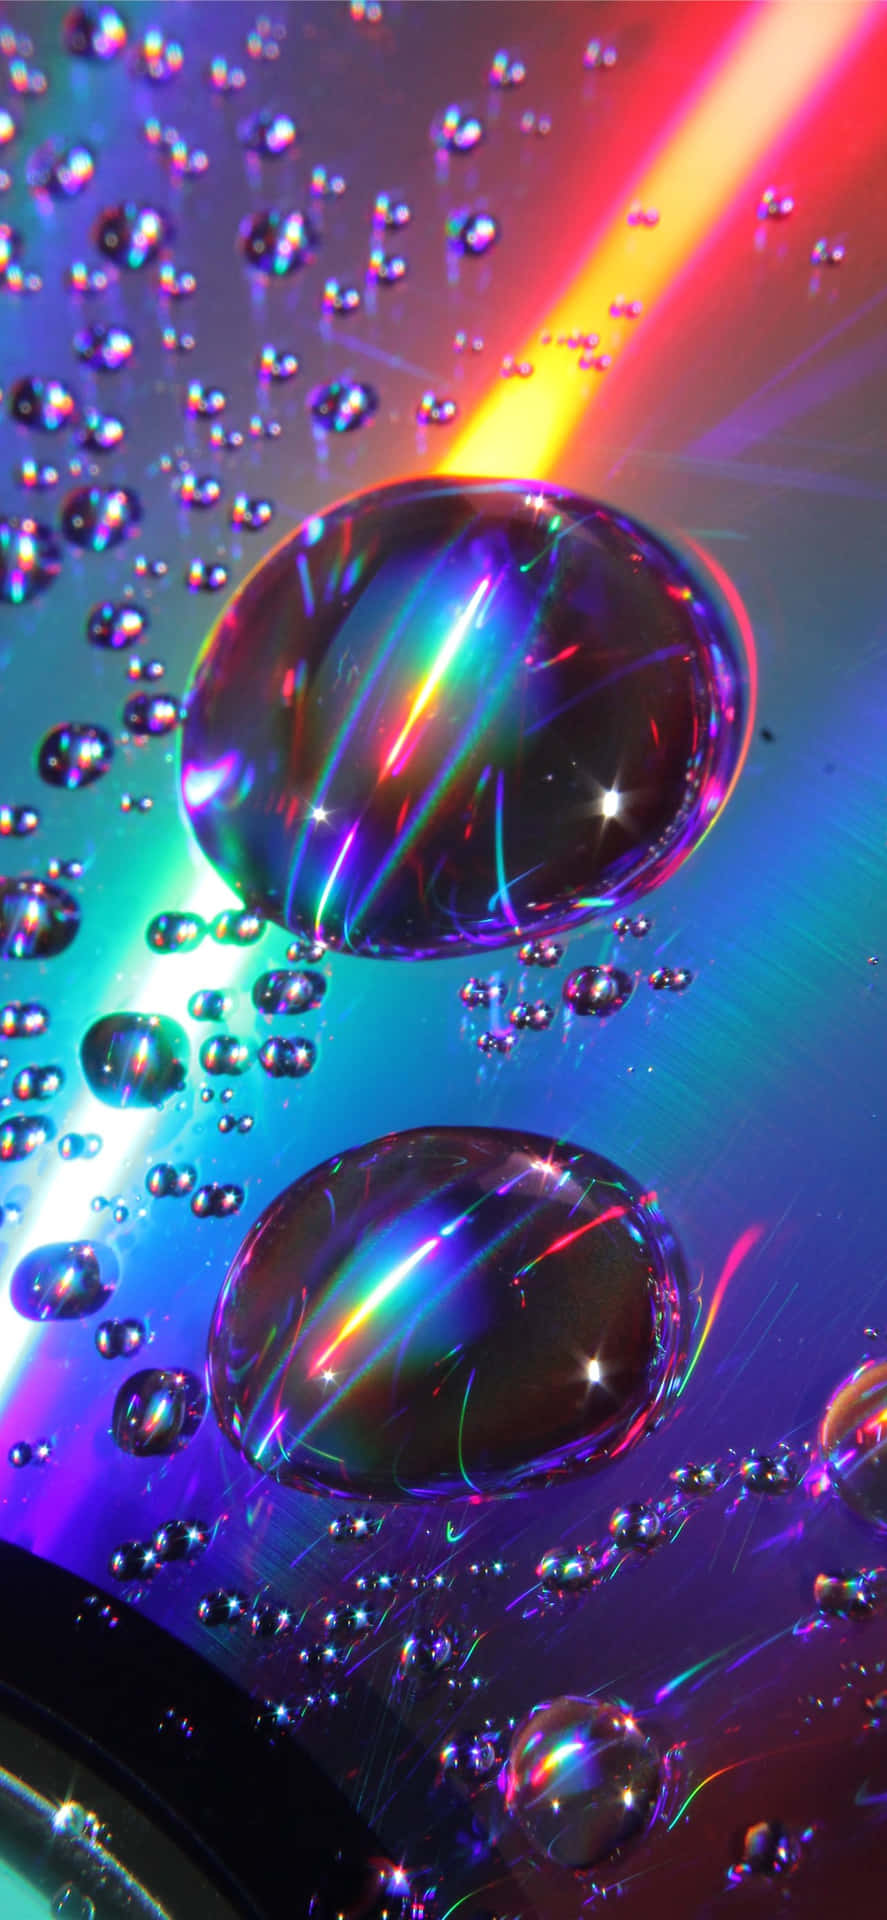 Psychedelic Water Dropletson C D Wallpaper